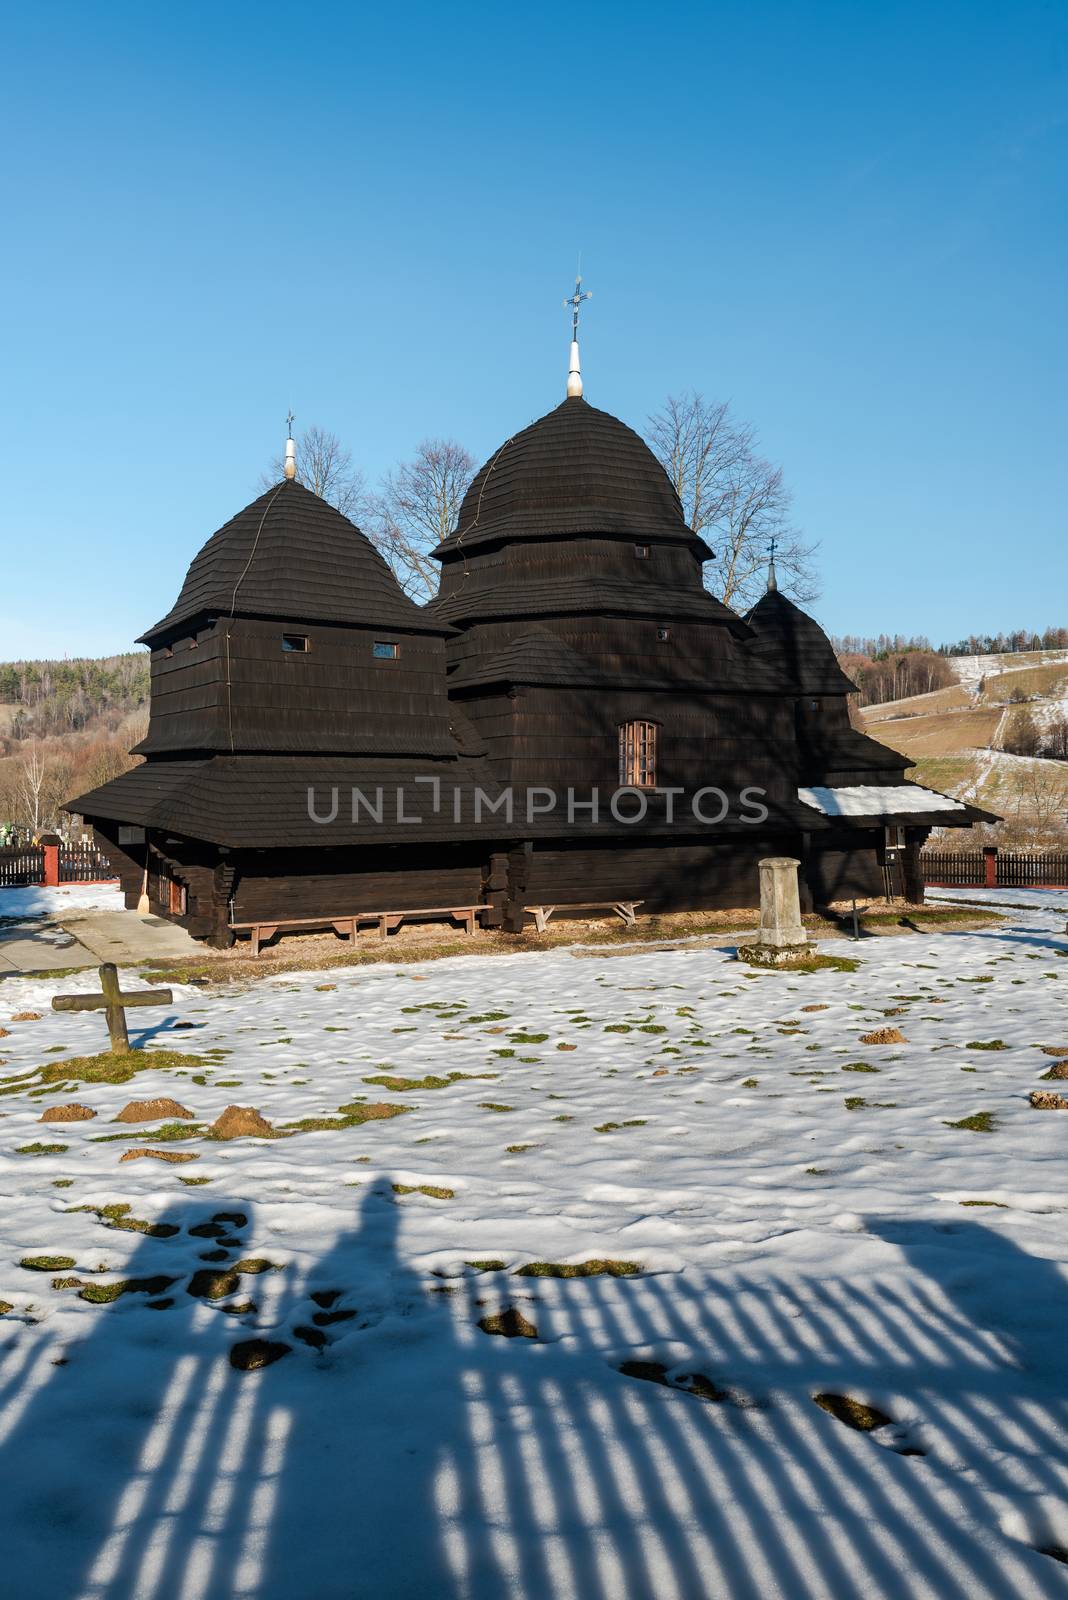 Wooden Orthodox Church in Rownia. Carpathian Mountains and Bieszczady Architecture in Winter.